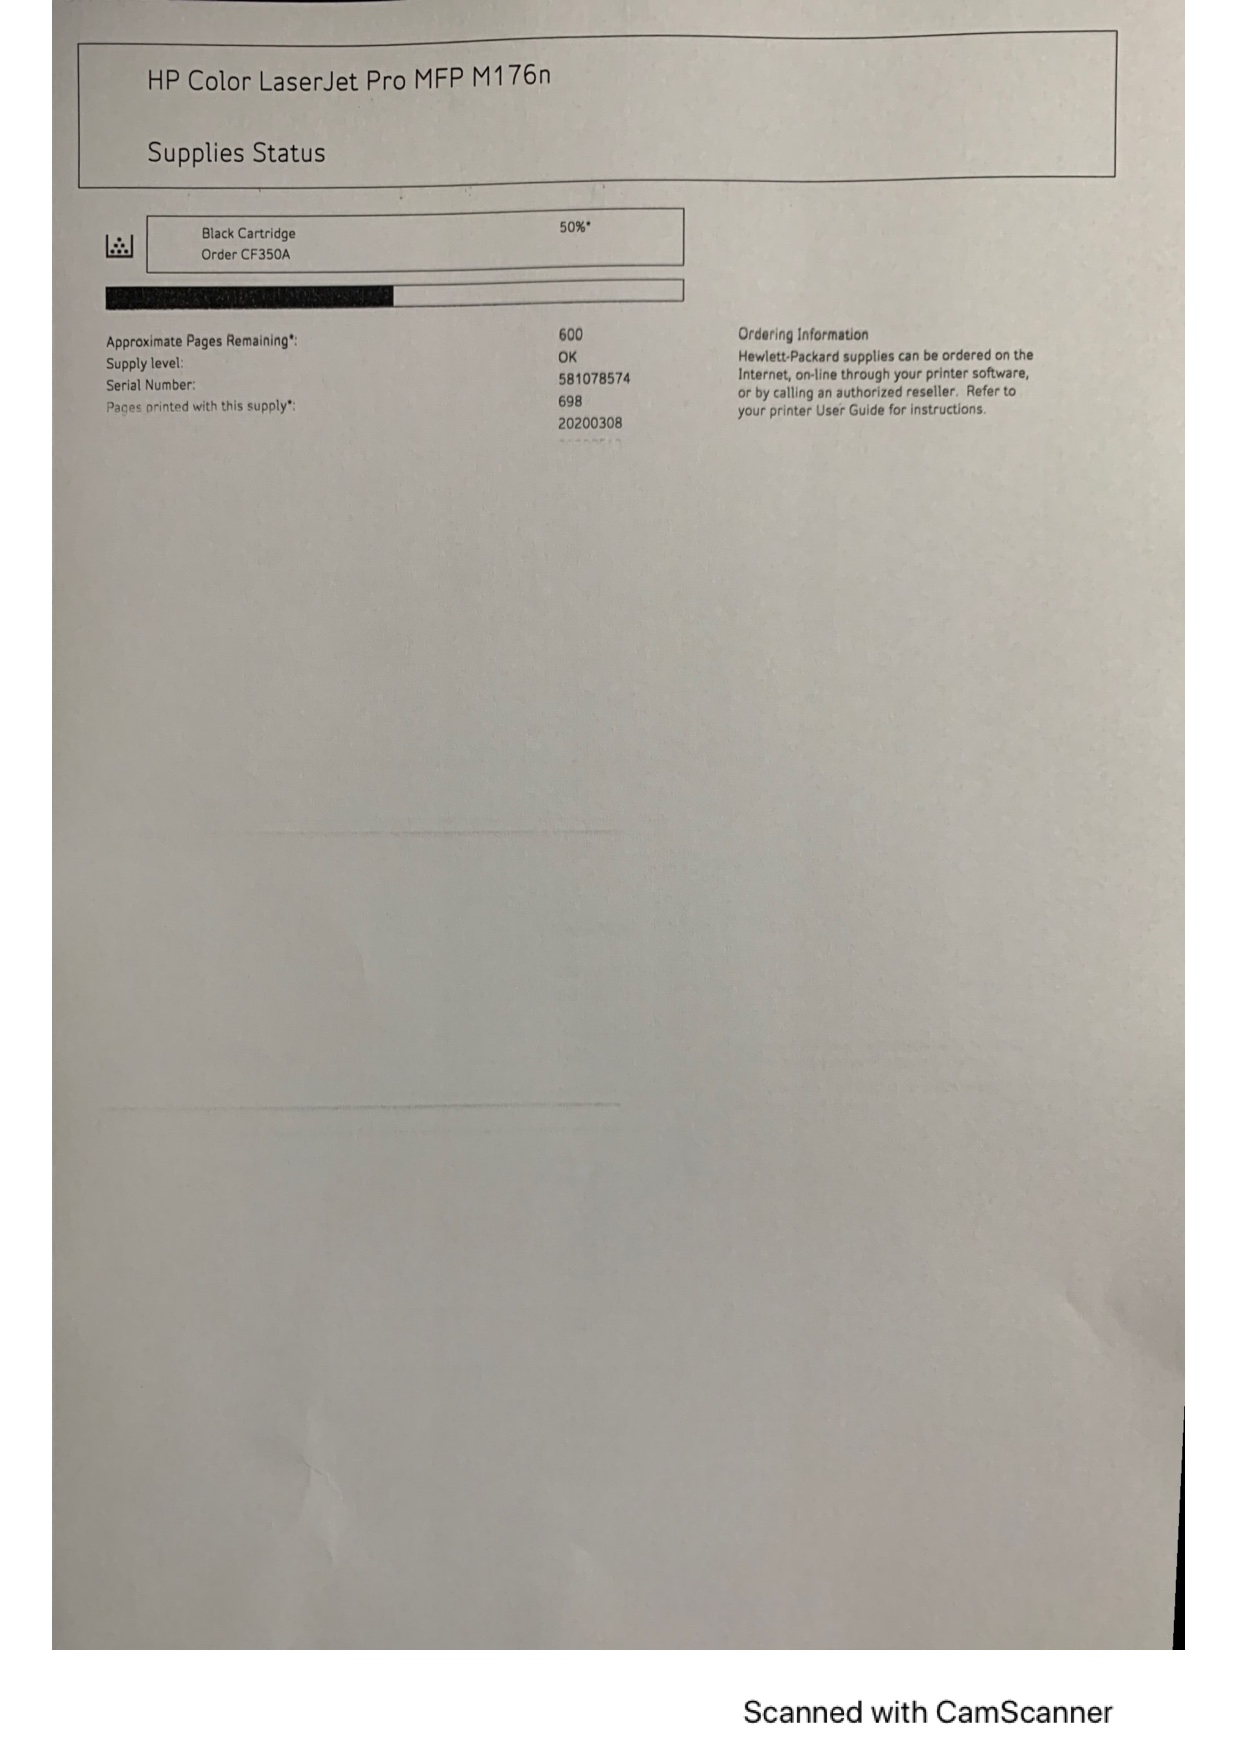 HP Color Laser Jet PRO MFP M176n Print Quality Issues - HP Support  Community - 7965056